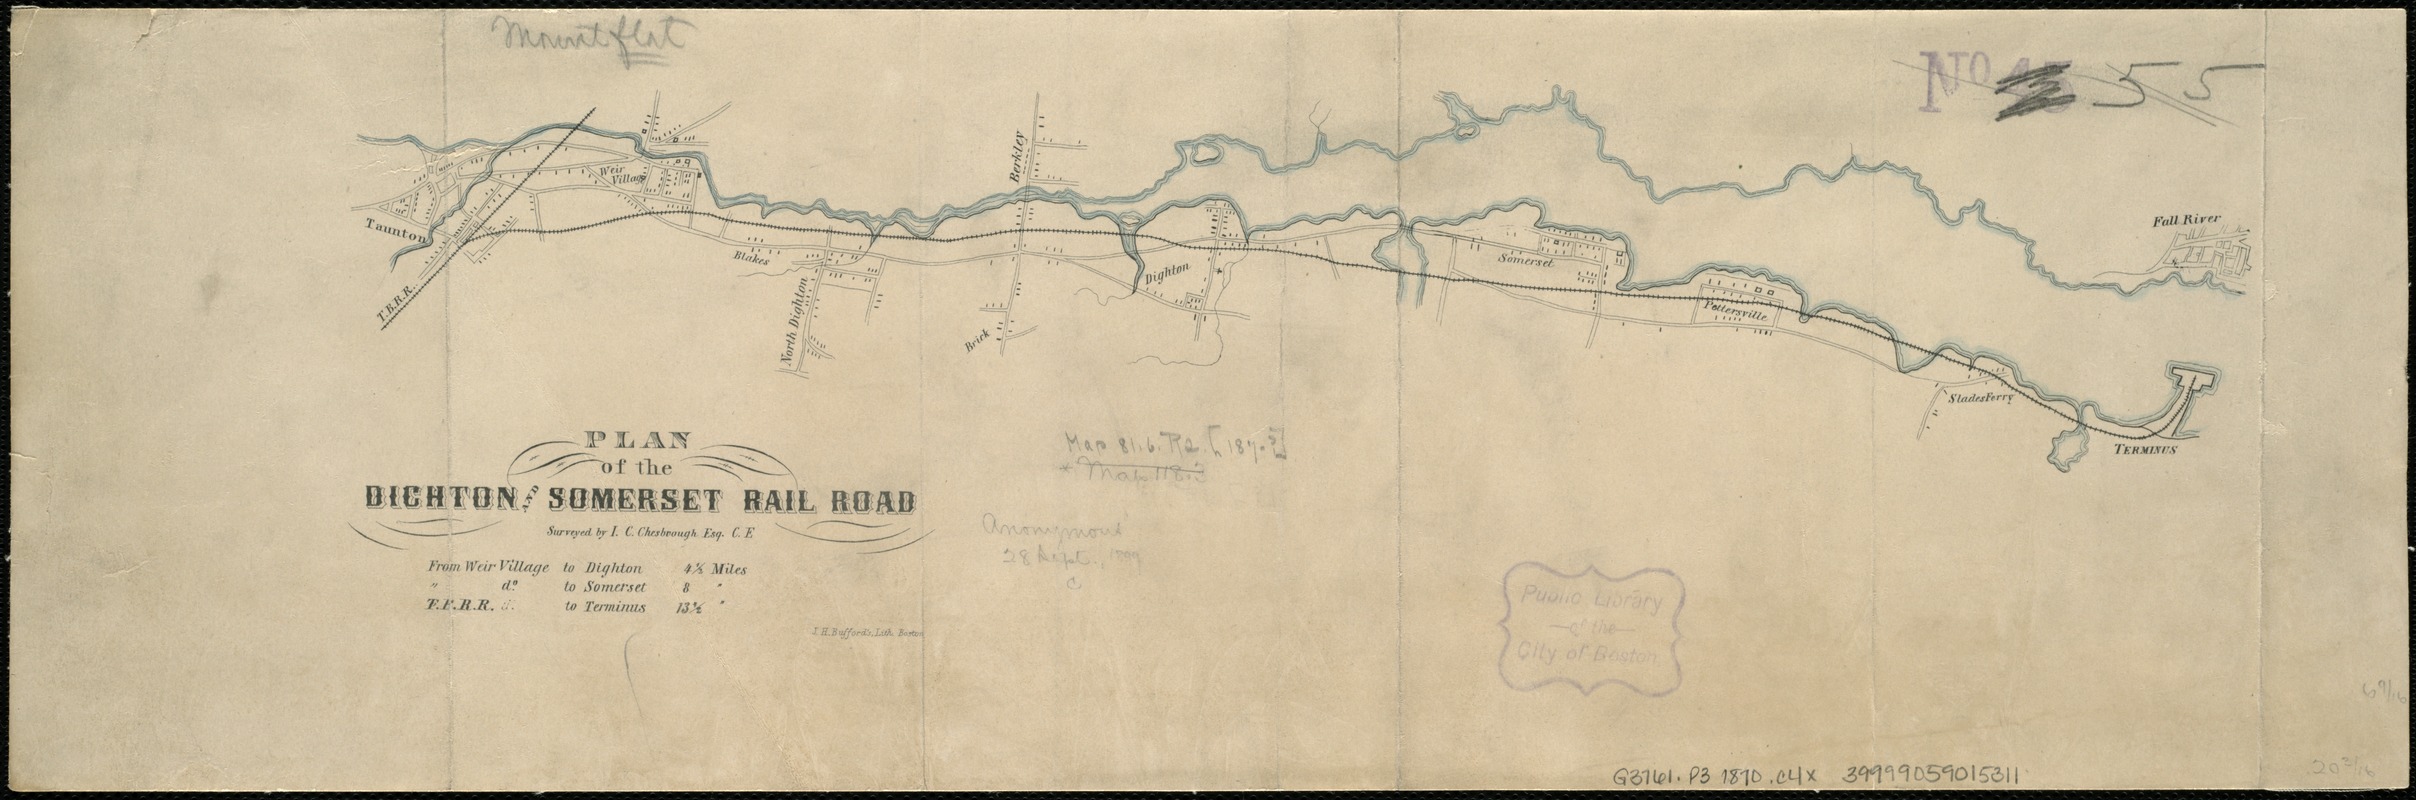 Plan of the Dighton and Somerset rail road